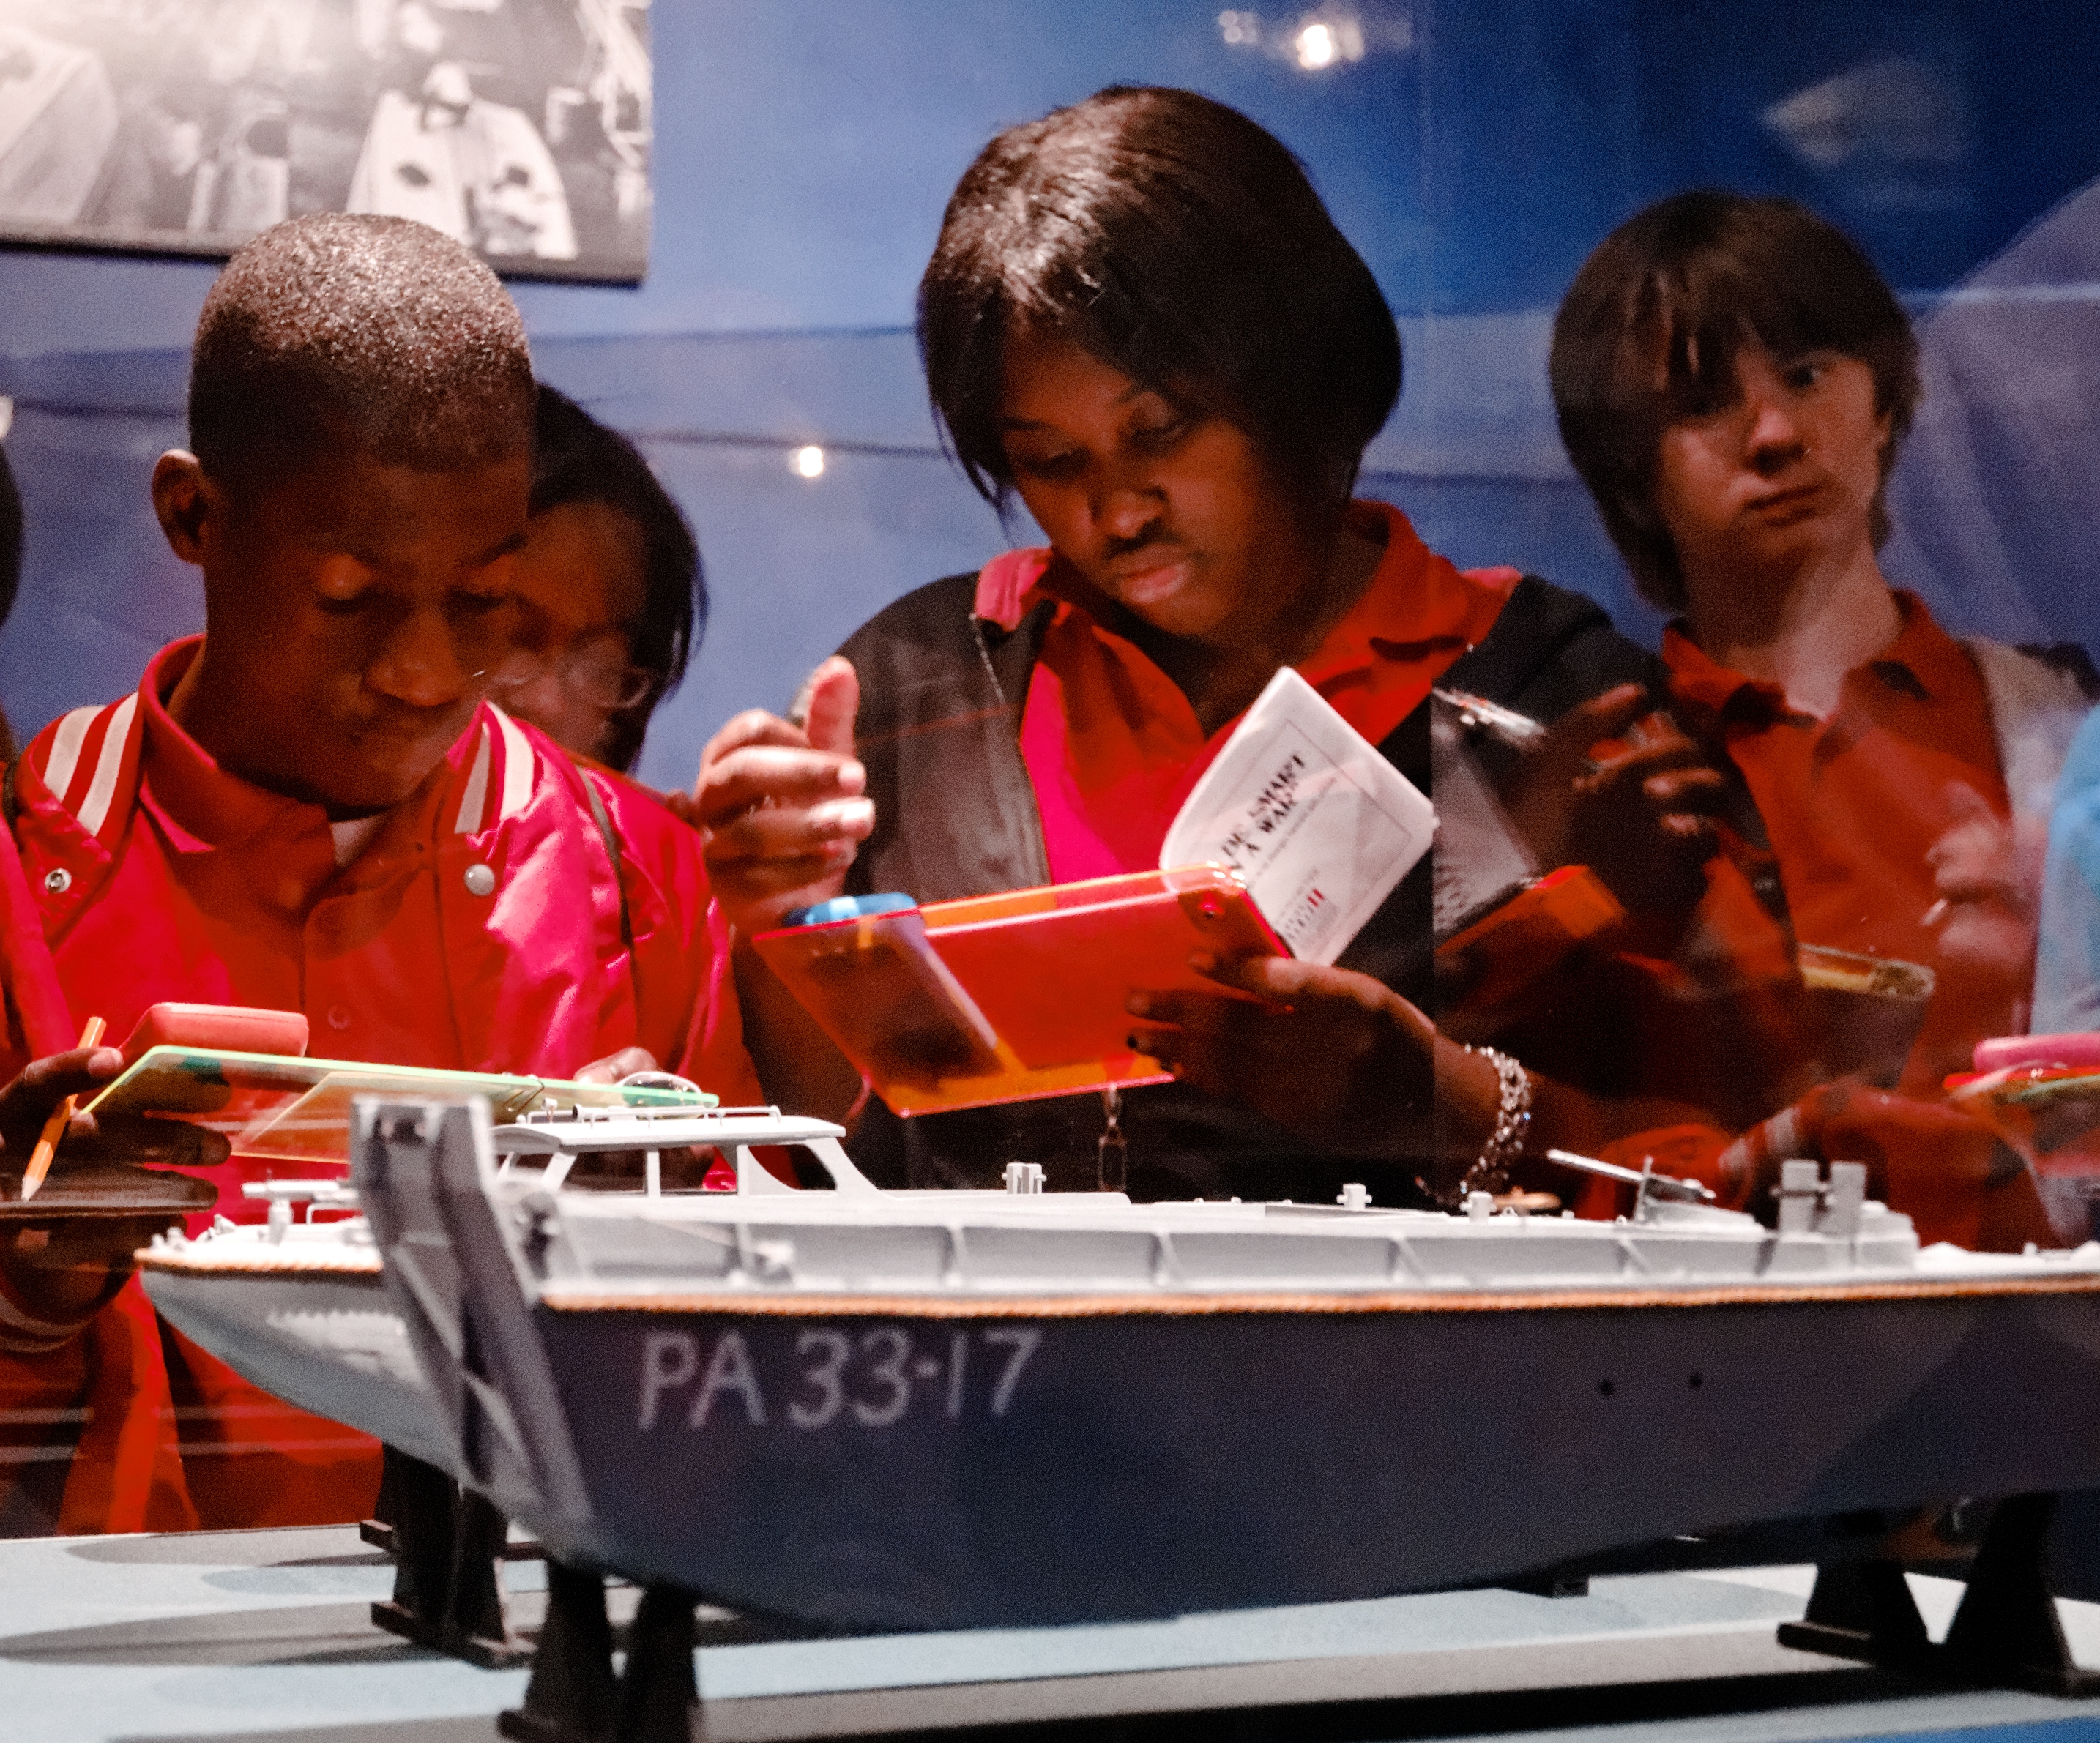 Students during The National WWII Museum’s STEM Field Trip. Courtesy of The National WWII Museum